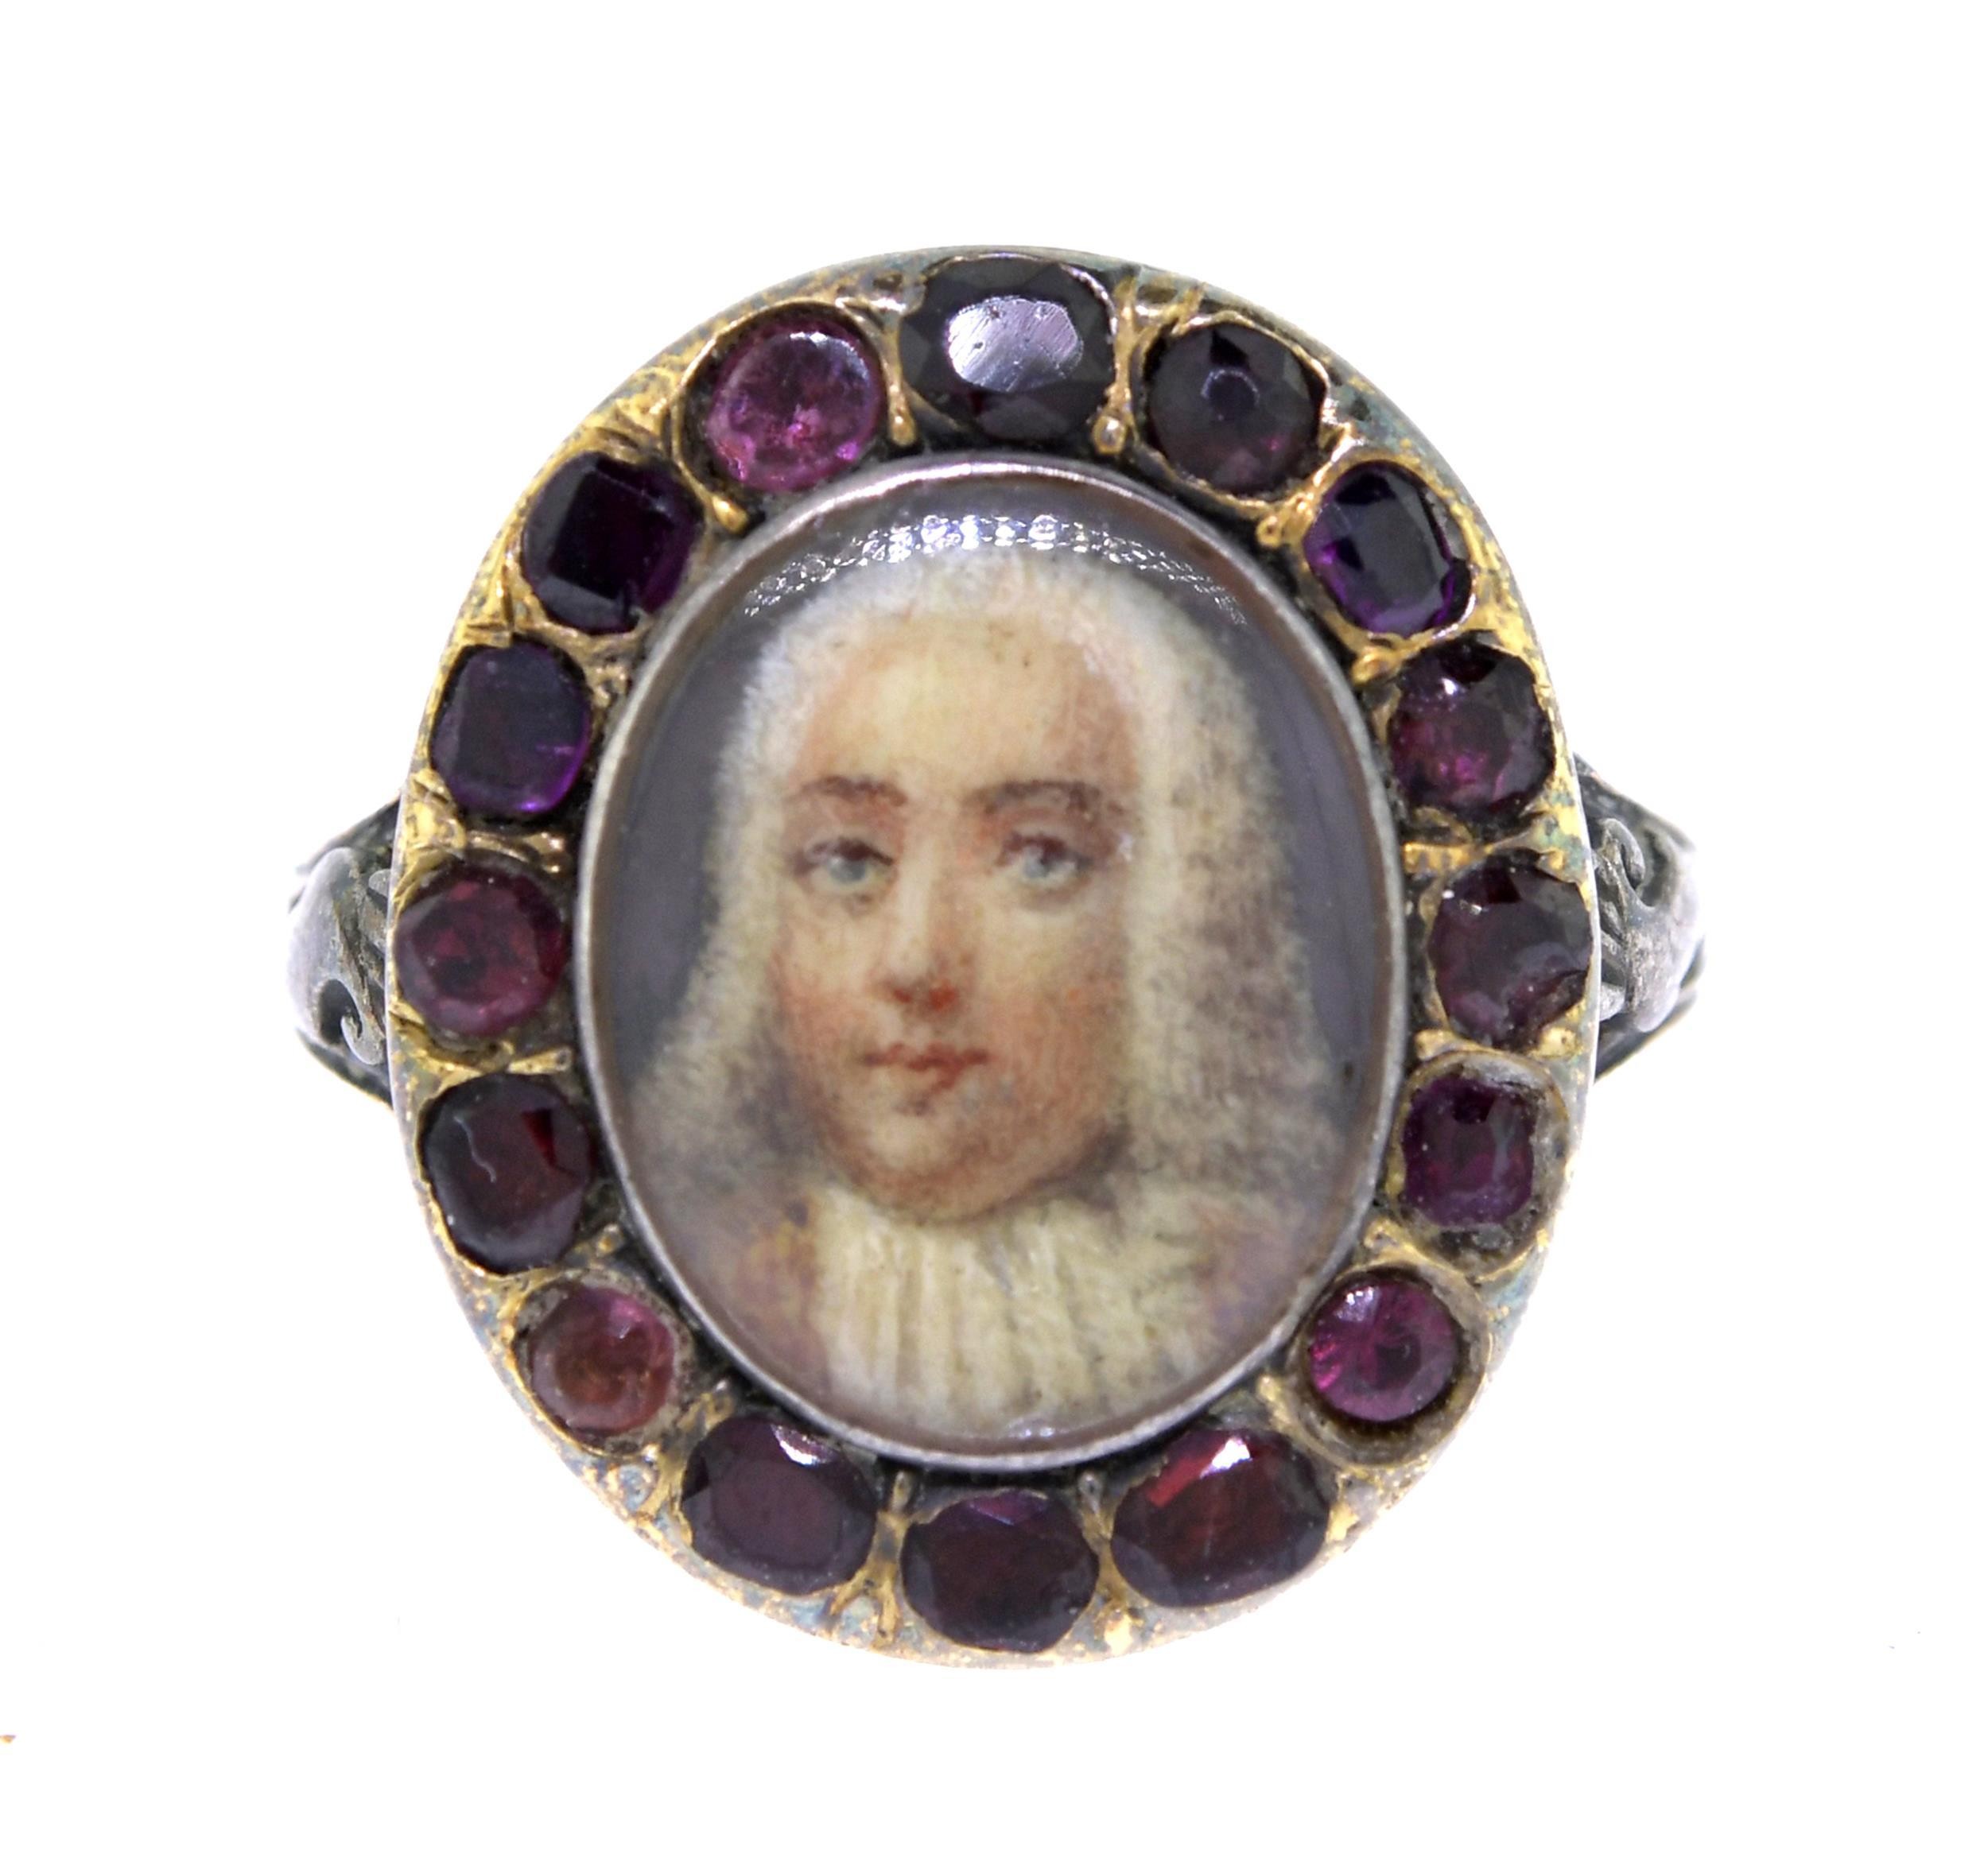 GEORGIAN PORTRAIT RING OF MAN SURROUNDED